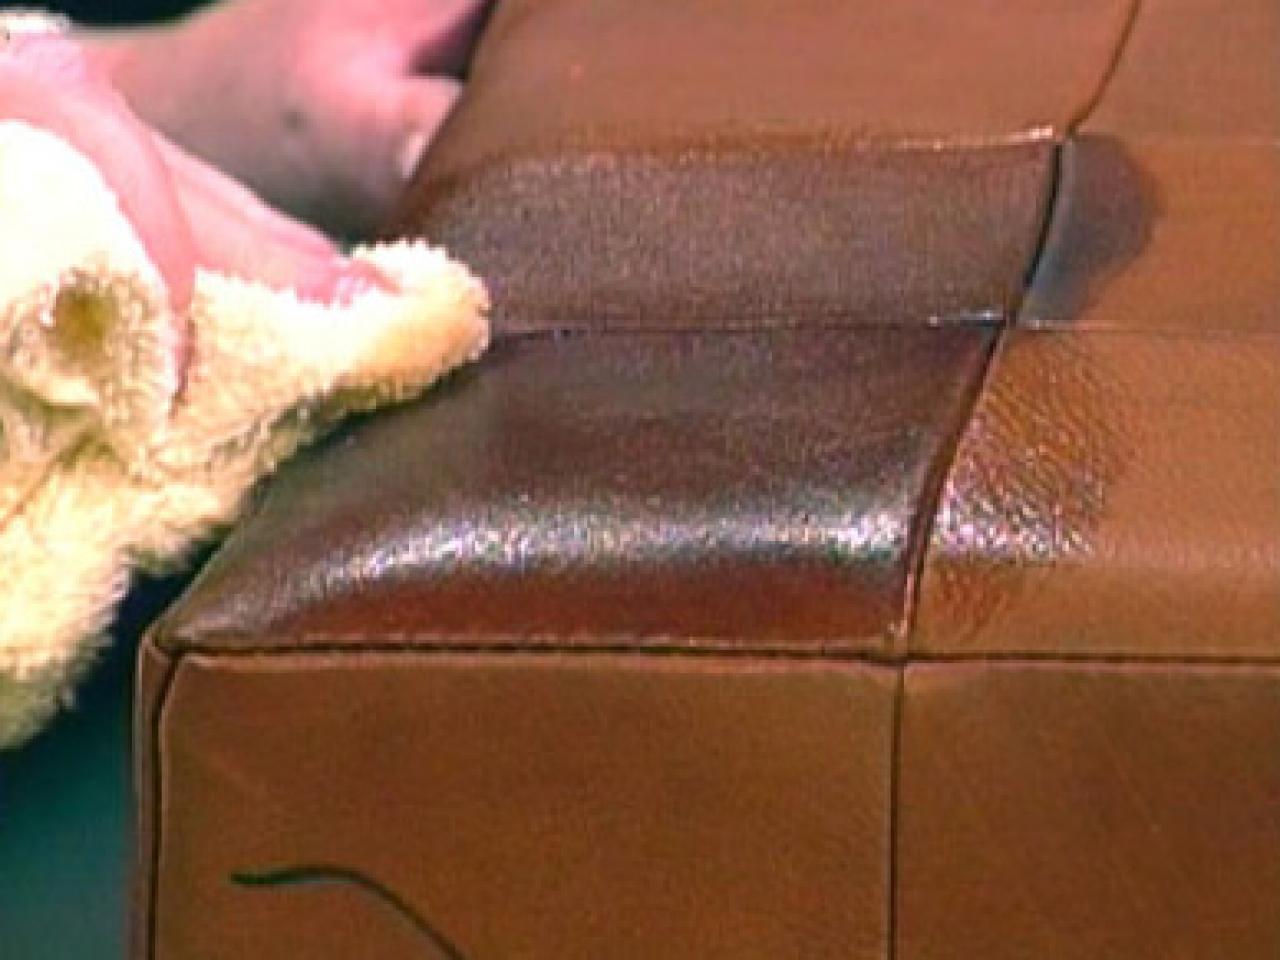 remove wine stain from leather sofa